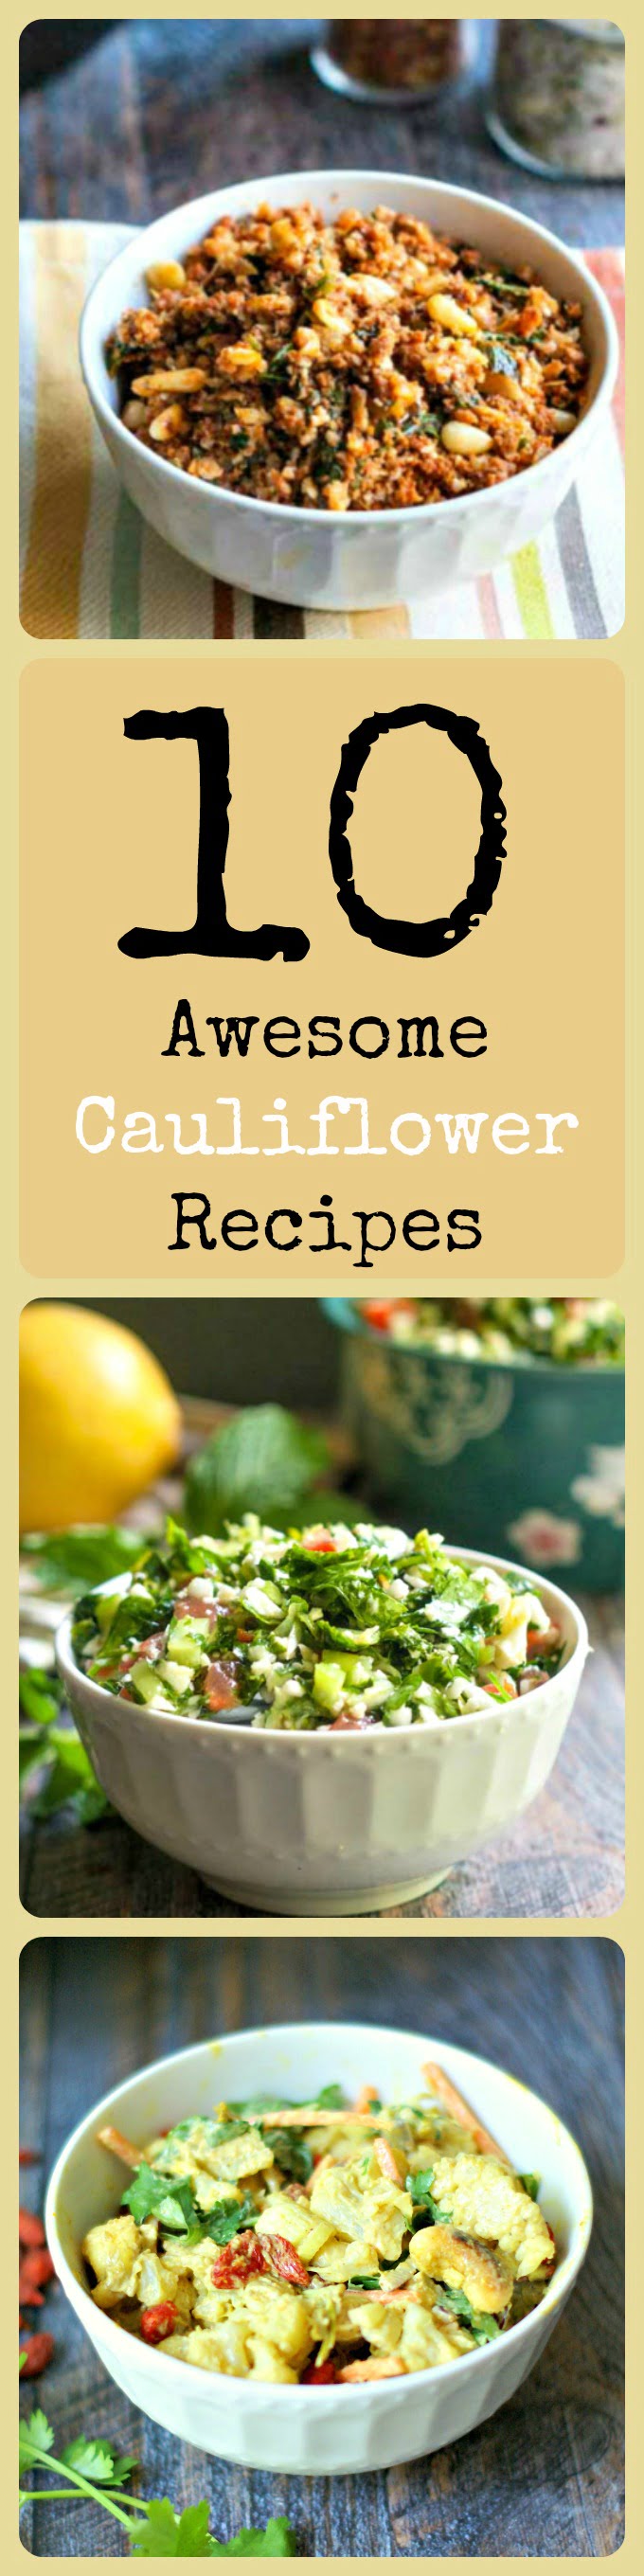 10 awesome cauliflower recipes to make healthy side dishes that are sometimes low carb or Paleo but always tasty!